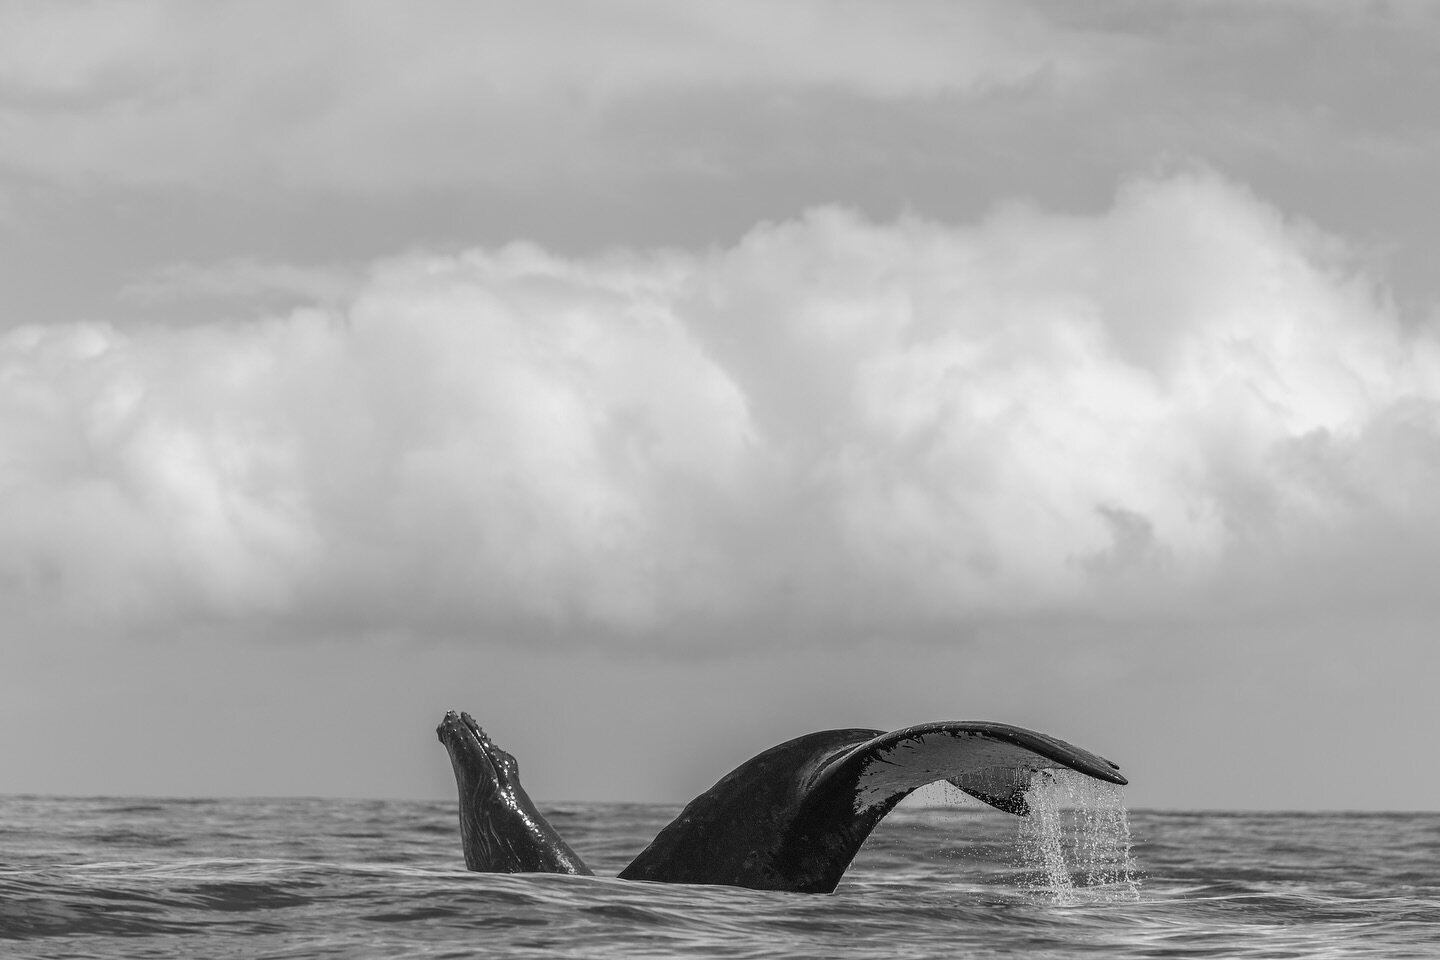 The beauty of overcast days&hellip;

These two were putting on quite the show, slapping their tails and breaching several times as a male was lurking around&hellip; he ultimately left but that calf couldn&rsquo;t have enough jumping around!

.
.
.
.
